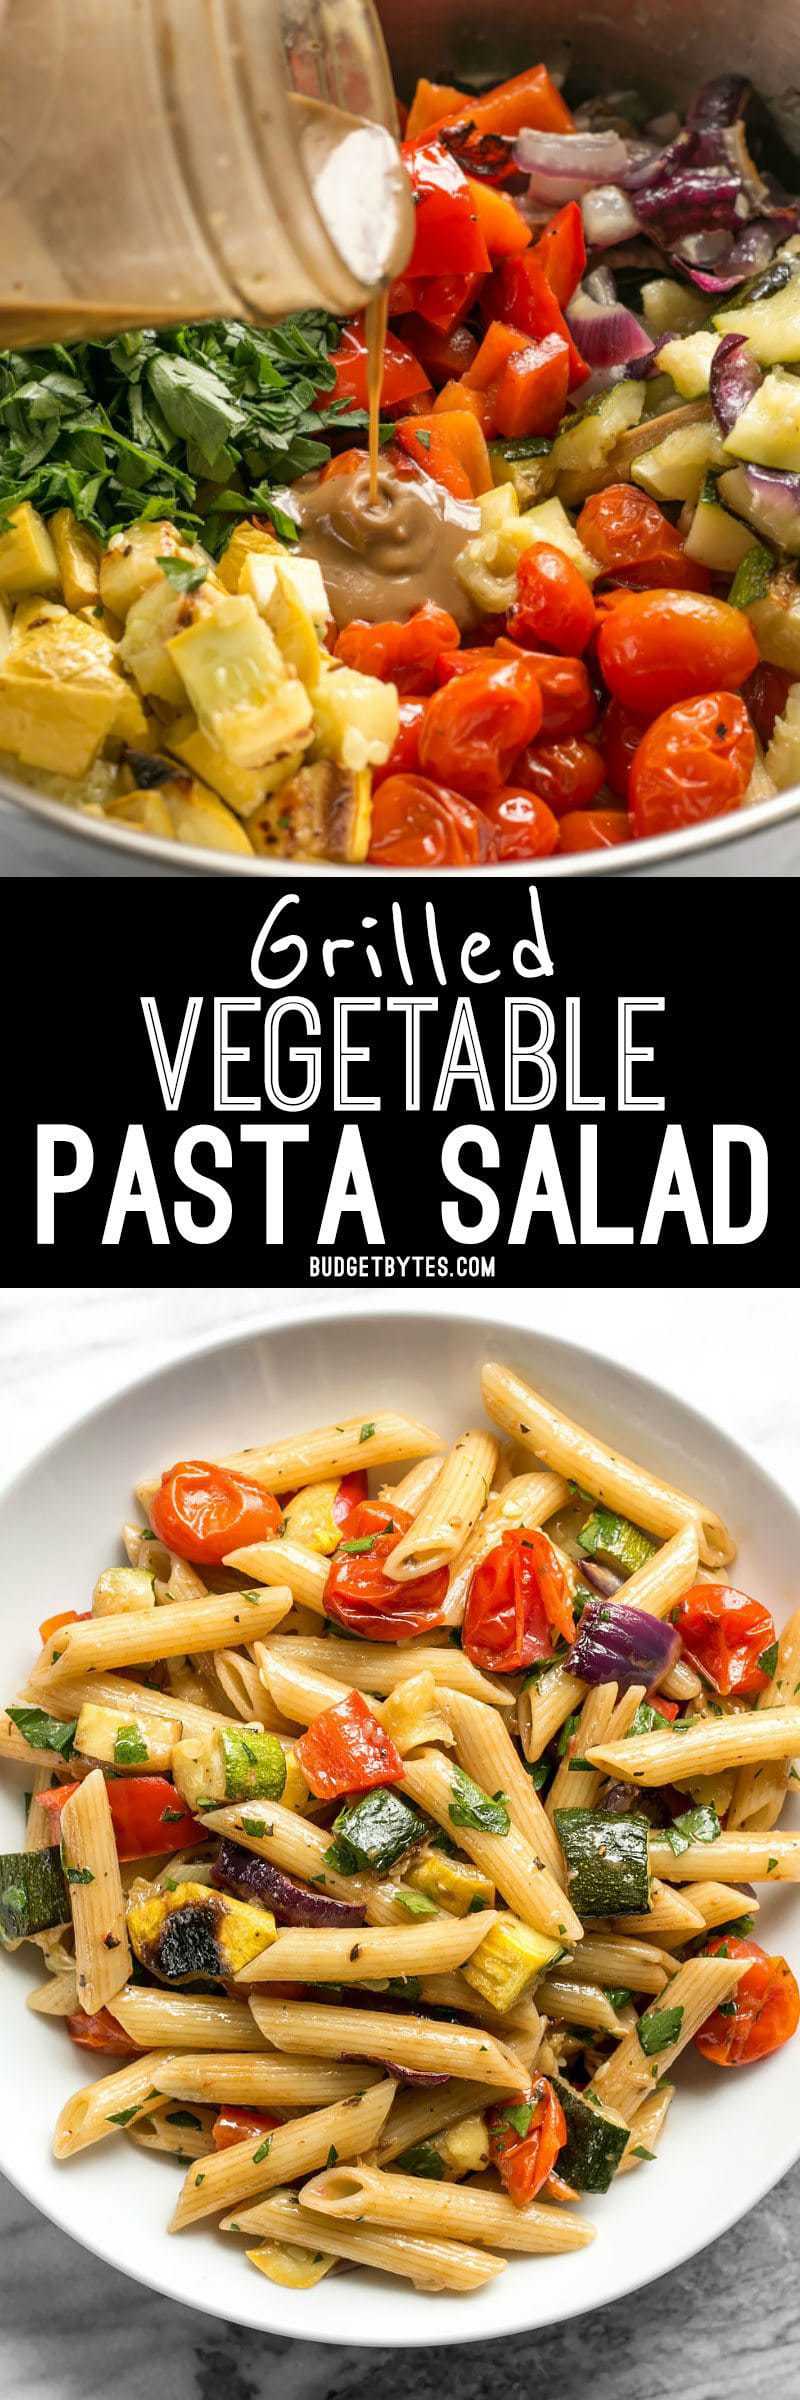 This classic summer Grilled Vegetable Pasta Salad features smoky fire licked vegetables and a homemade creamy balsamic vinaigrette. BudgetBytes.com